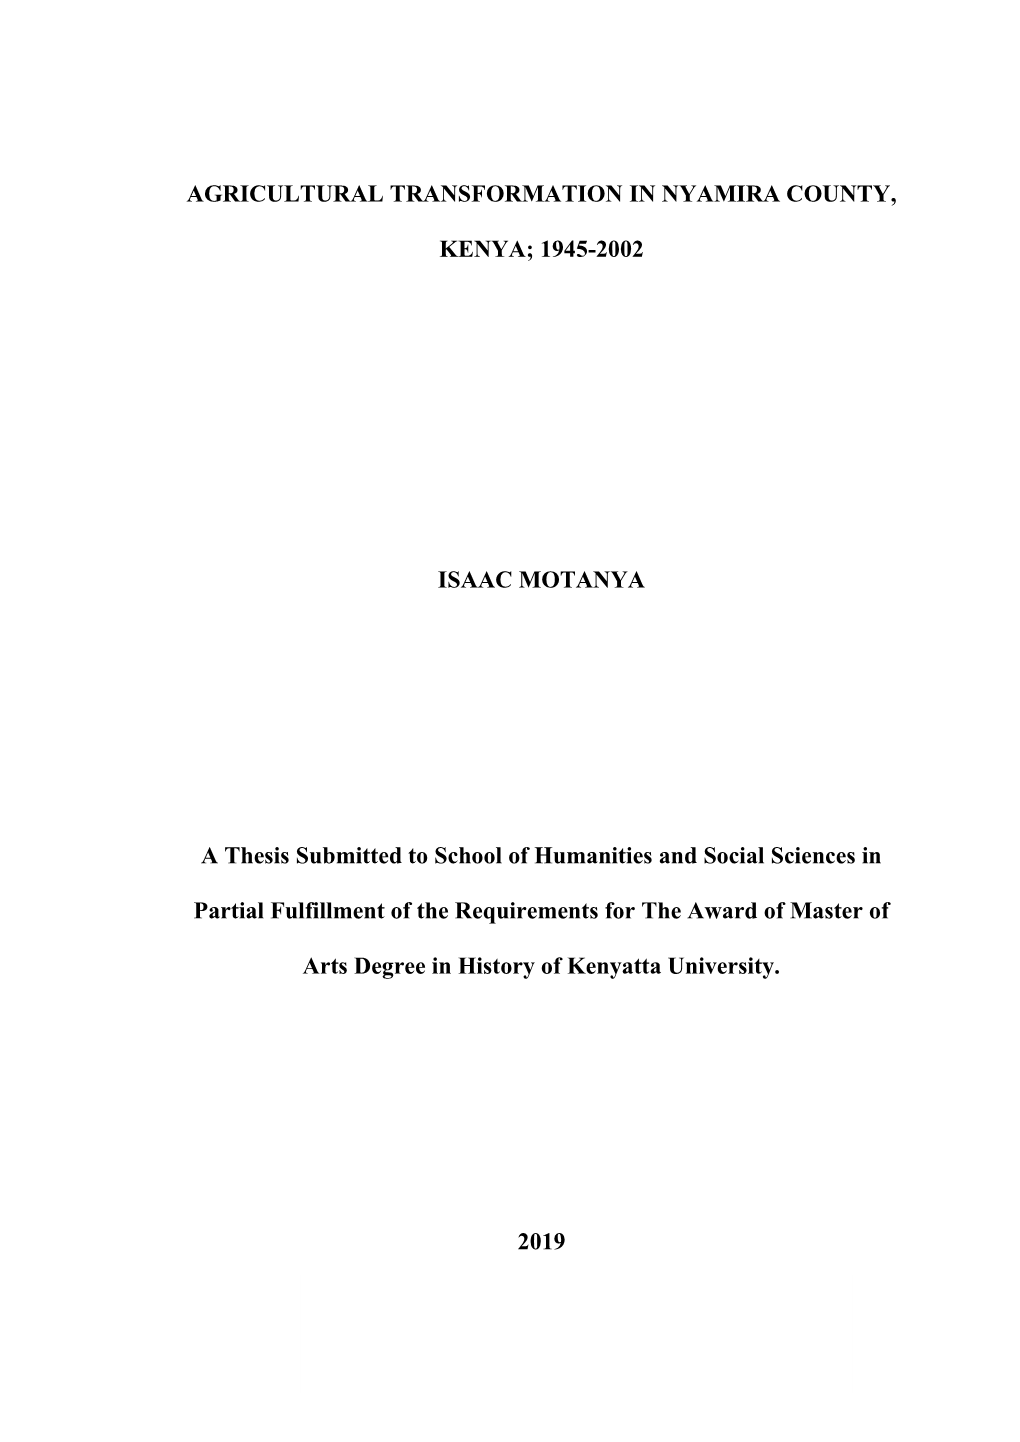 AGRICULTURAL TRANSFORMATION in NYAMIRA COUNTY, KENYA; 1945-2002 ISAAC MOTANYA a Thesis Submitted to School of Humanities And